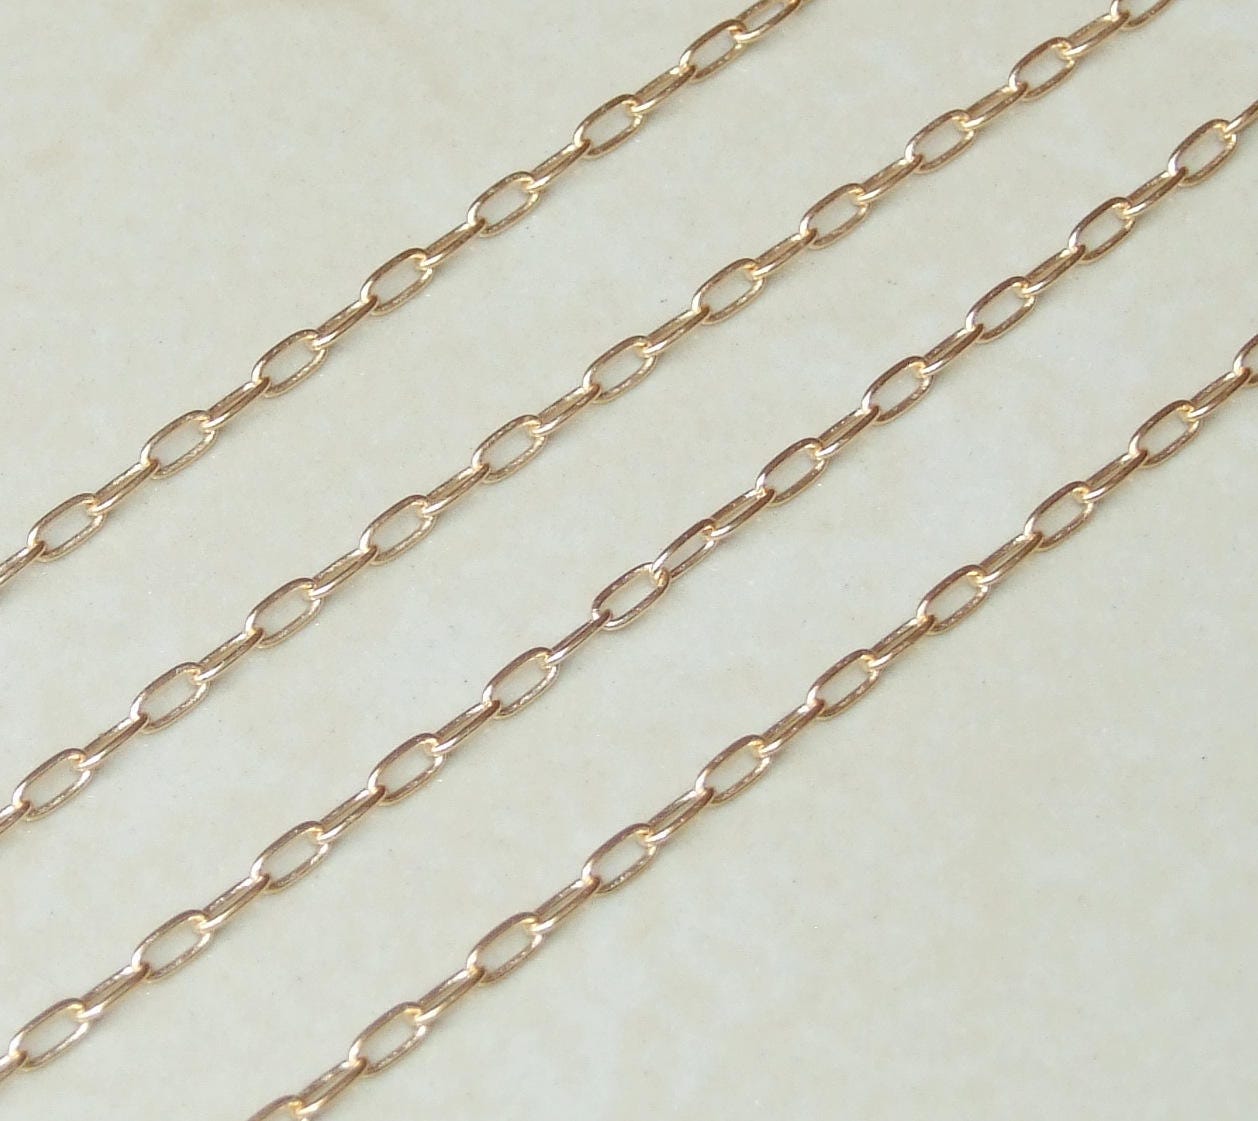 Paper Clip Chain, Oval C Link Cable Chain, Flat Cable Chain, Jewelry Chain, Necklace Chain, Gold Plated Chain, Body Chain, Bulk Chain, LG-NF